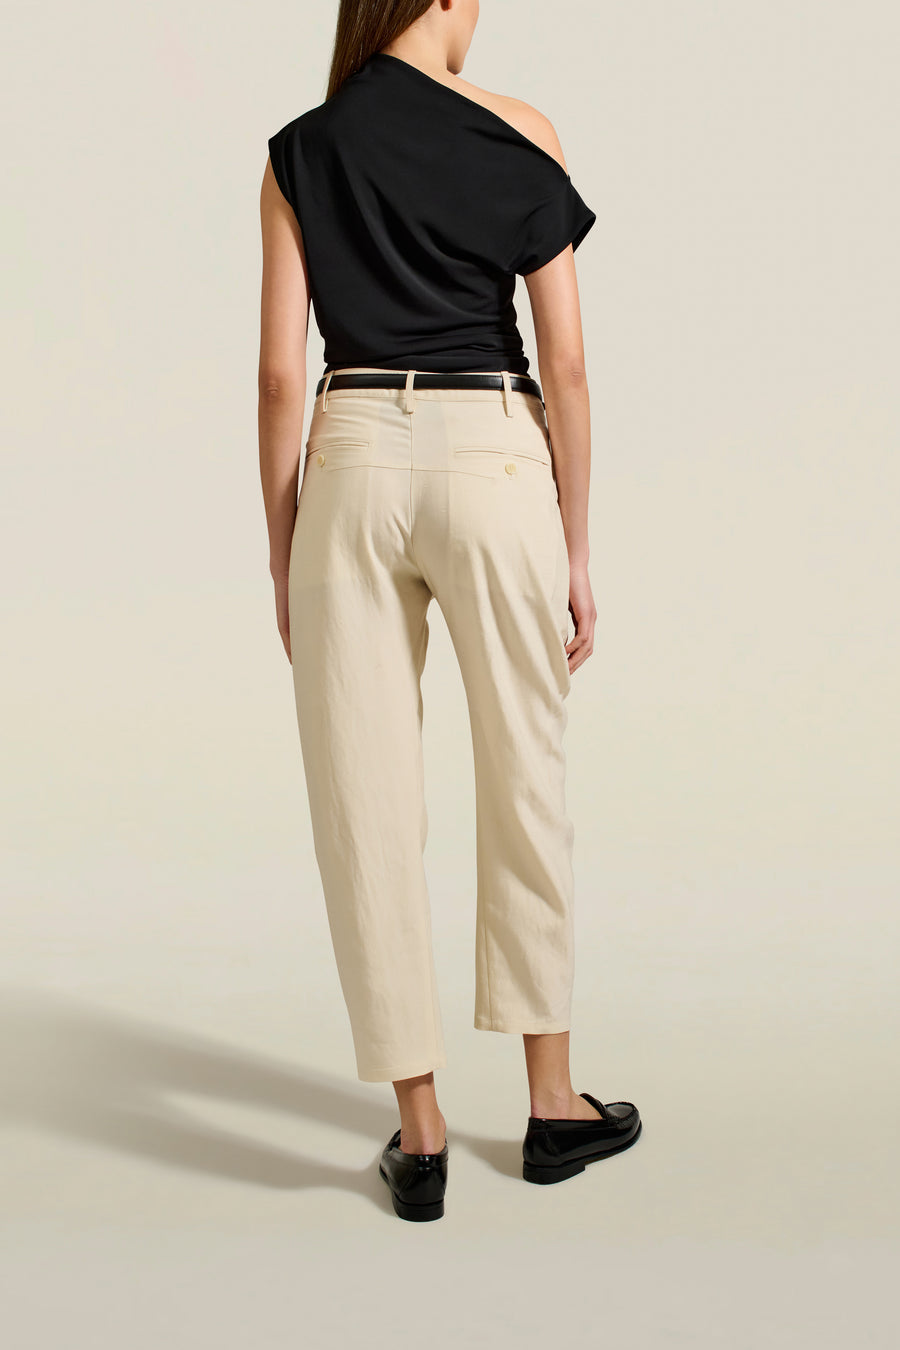 Spencer Twisted Seam Trouser in Wheat Summer Suiting